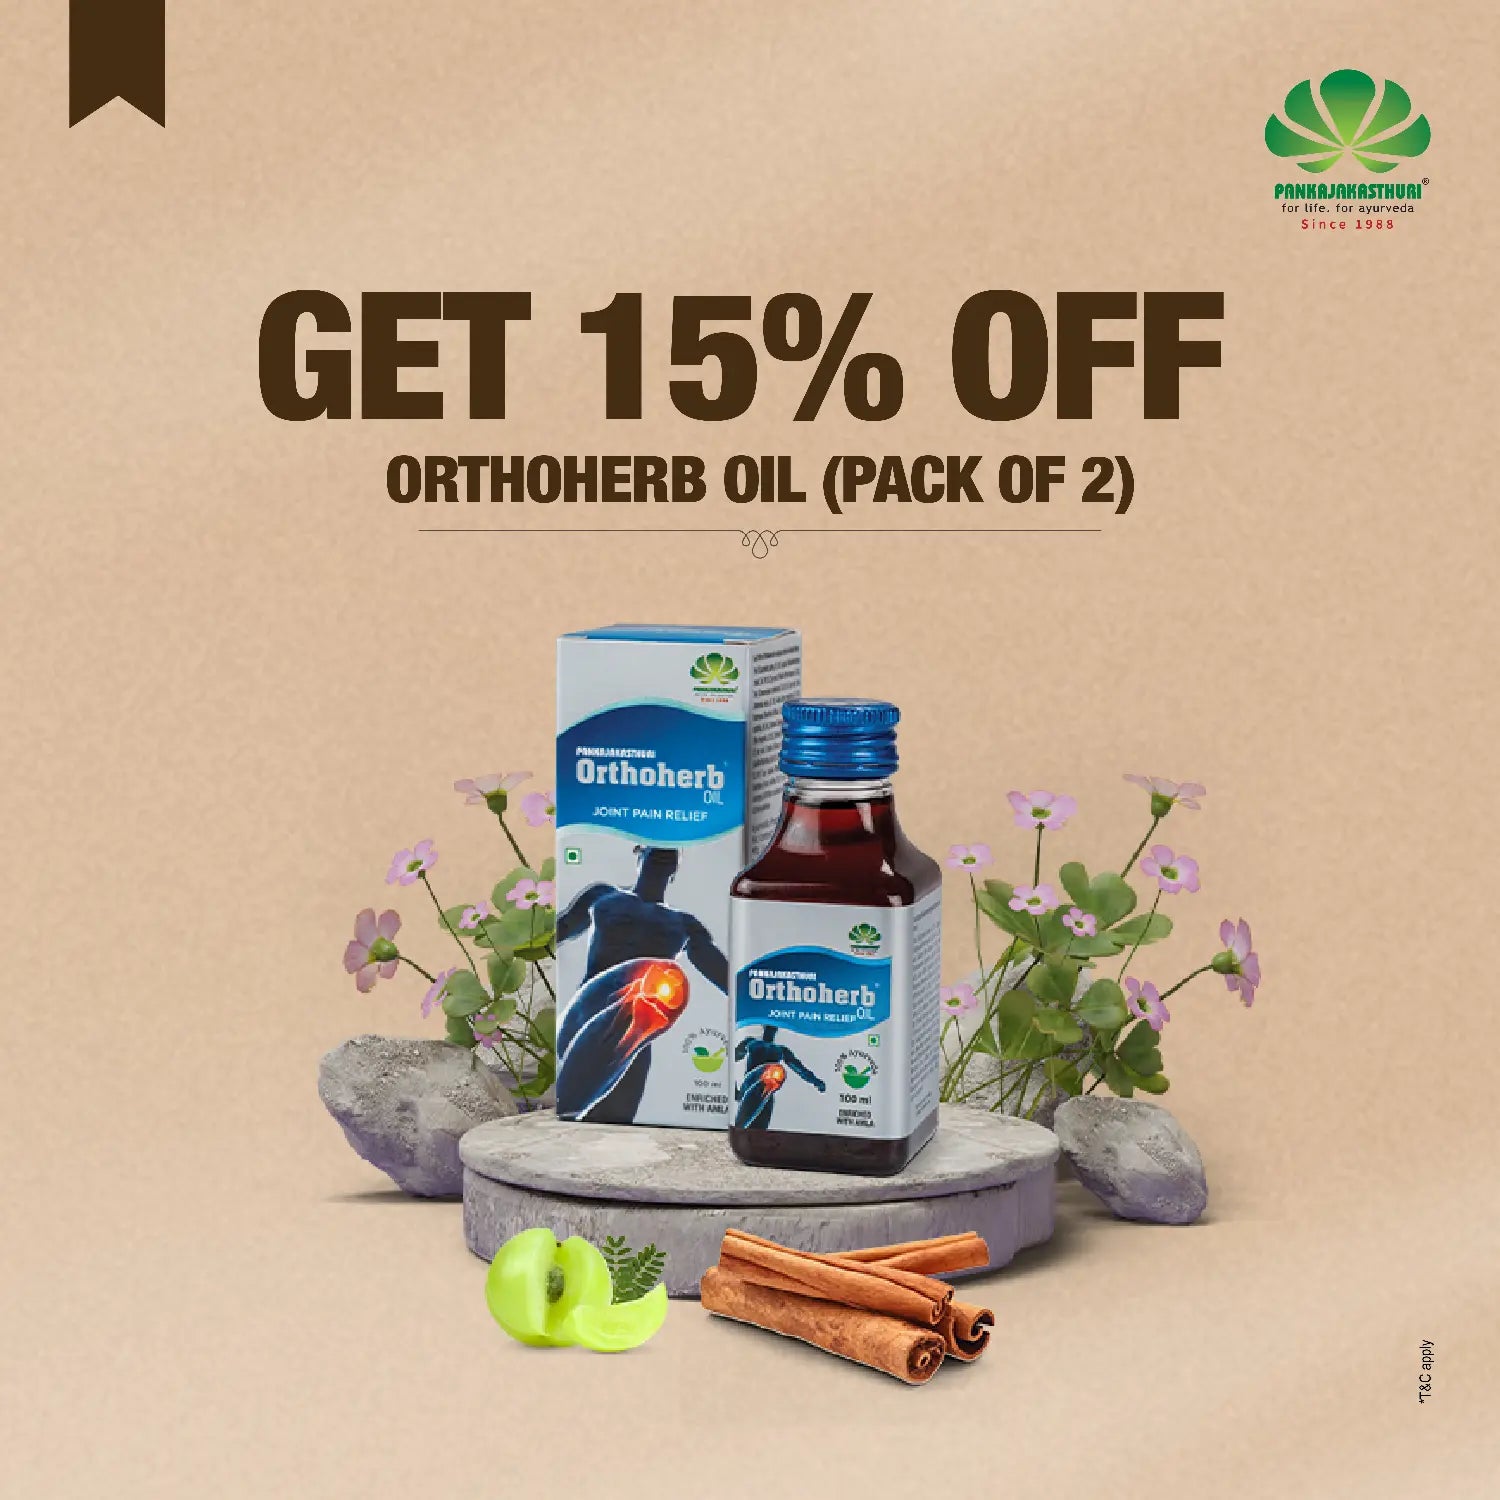 Orthoherb Oil Pack of 2 (15 % off)